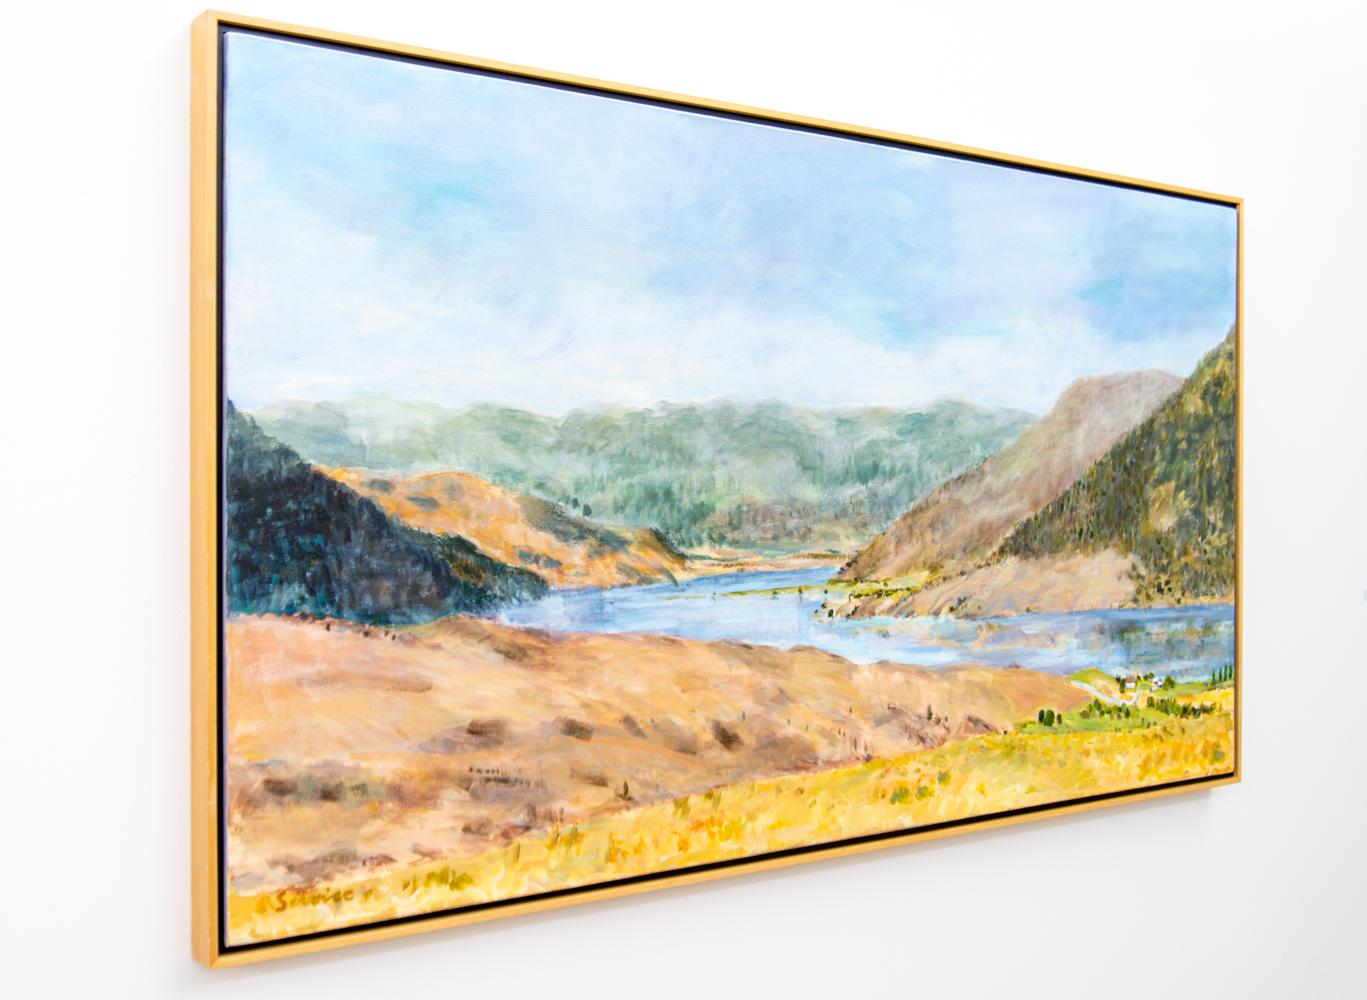 Pat Service’s expressive, colourful landscapes are a faithful homage to the land she grew up in. Nicola Lake was formed by ancient glaciers and winds its way through the hilly wilderness of south-central British Columbia. On a fishing trip with